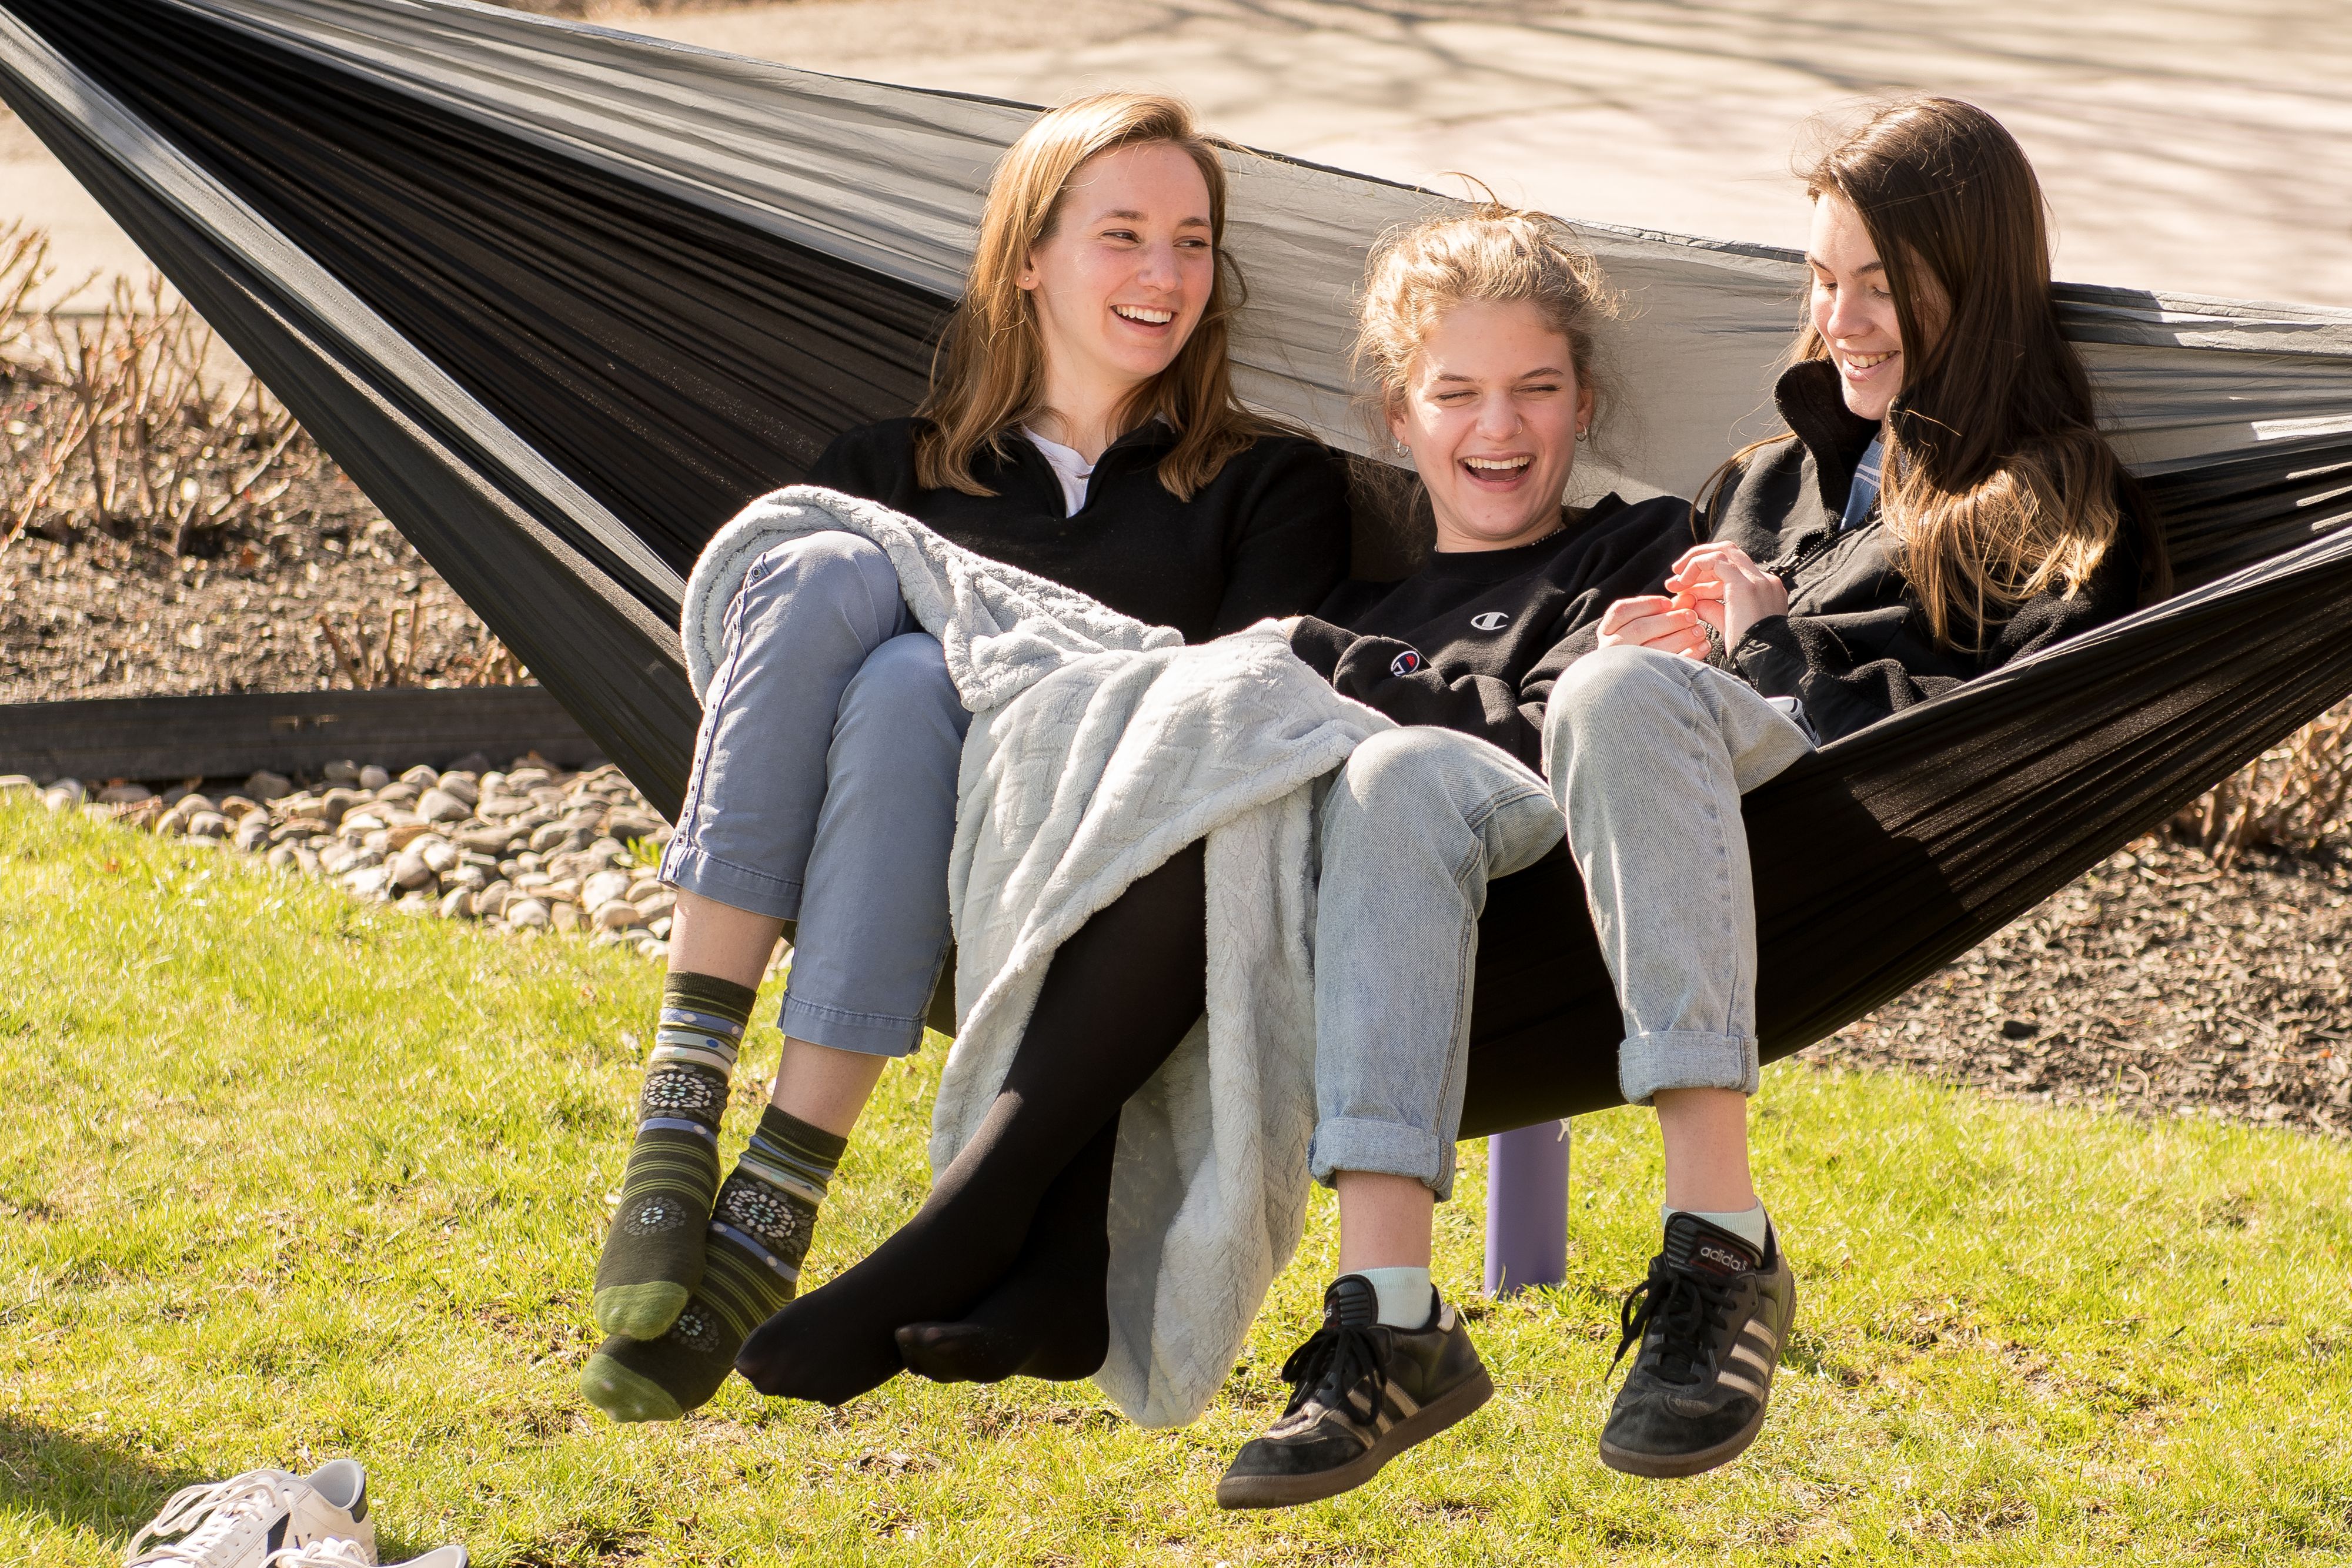 Three female college students laughing together in black hammock